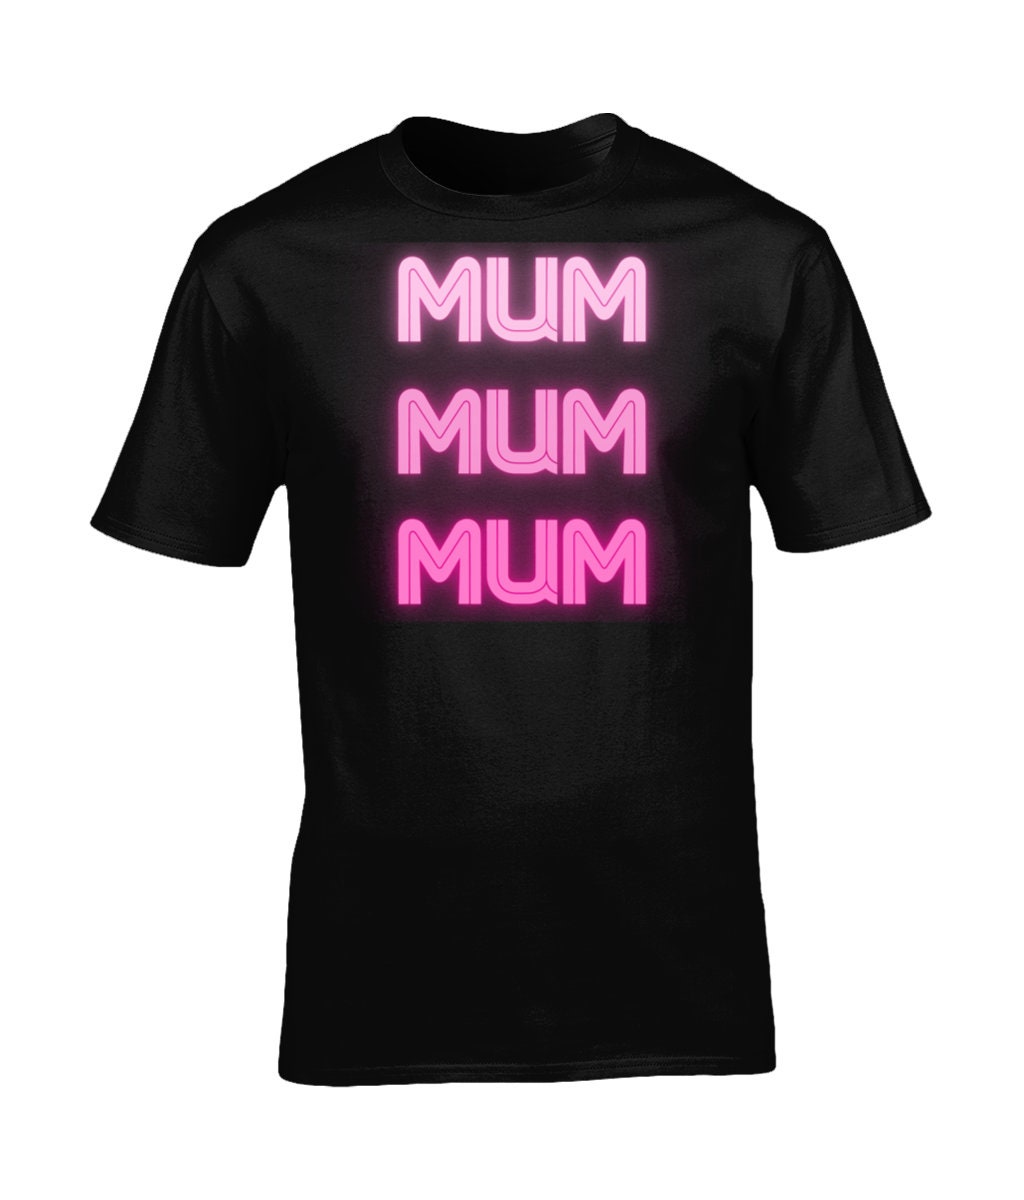 Excited to share the latest addition to my #etsy shop: Candy pink Mum Mum Mum T-Shirt etsy.me/3ZxVWcS #recycledpolyester #mum #mothersday #printfoolery